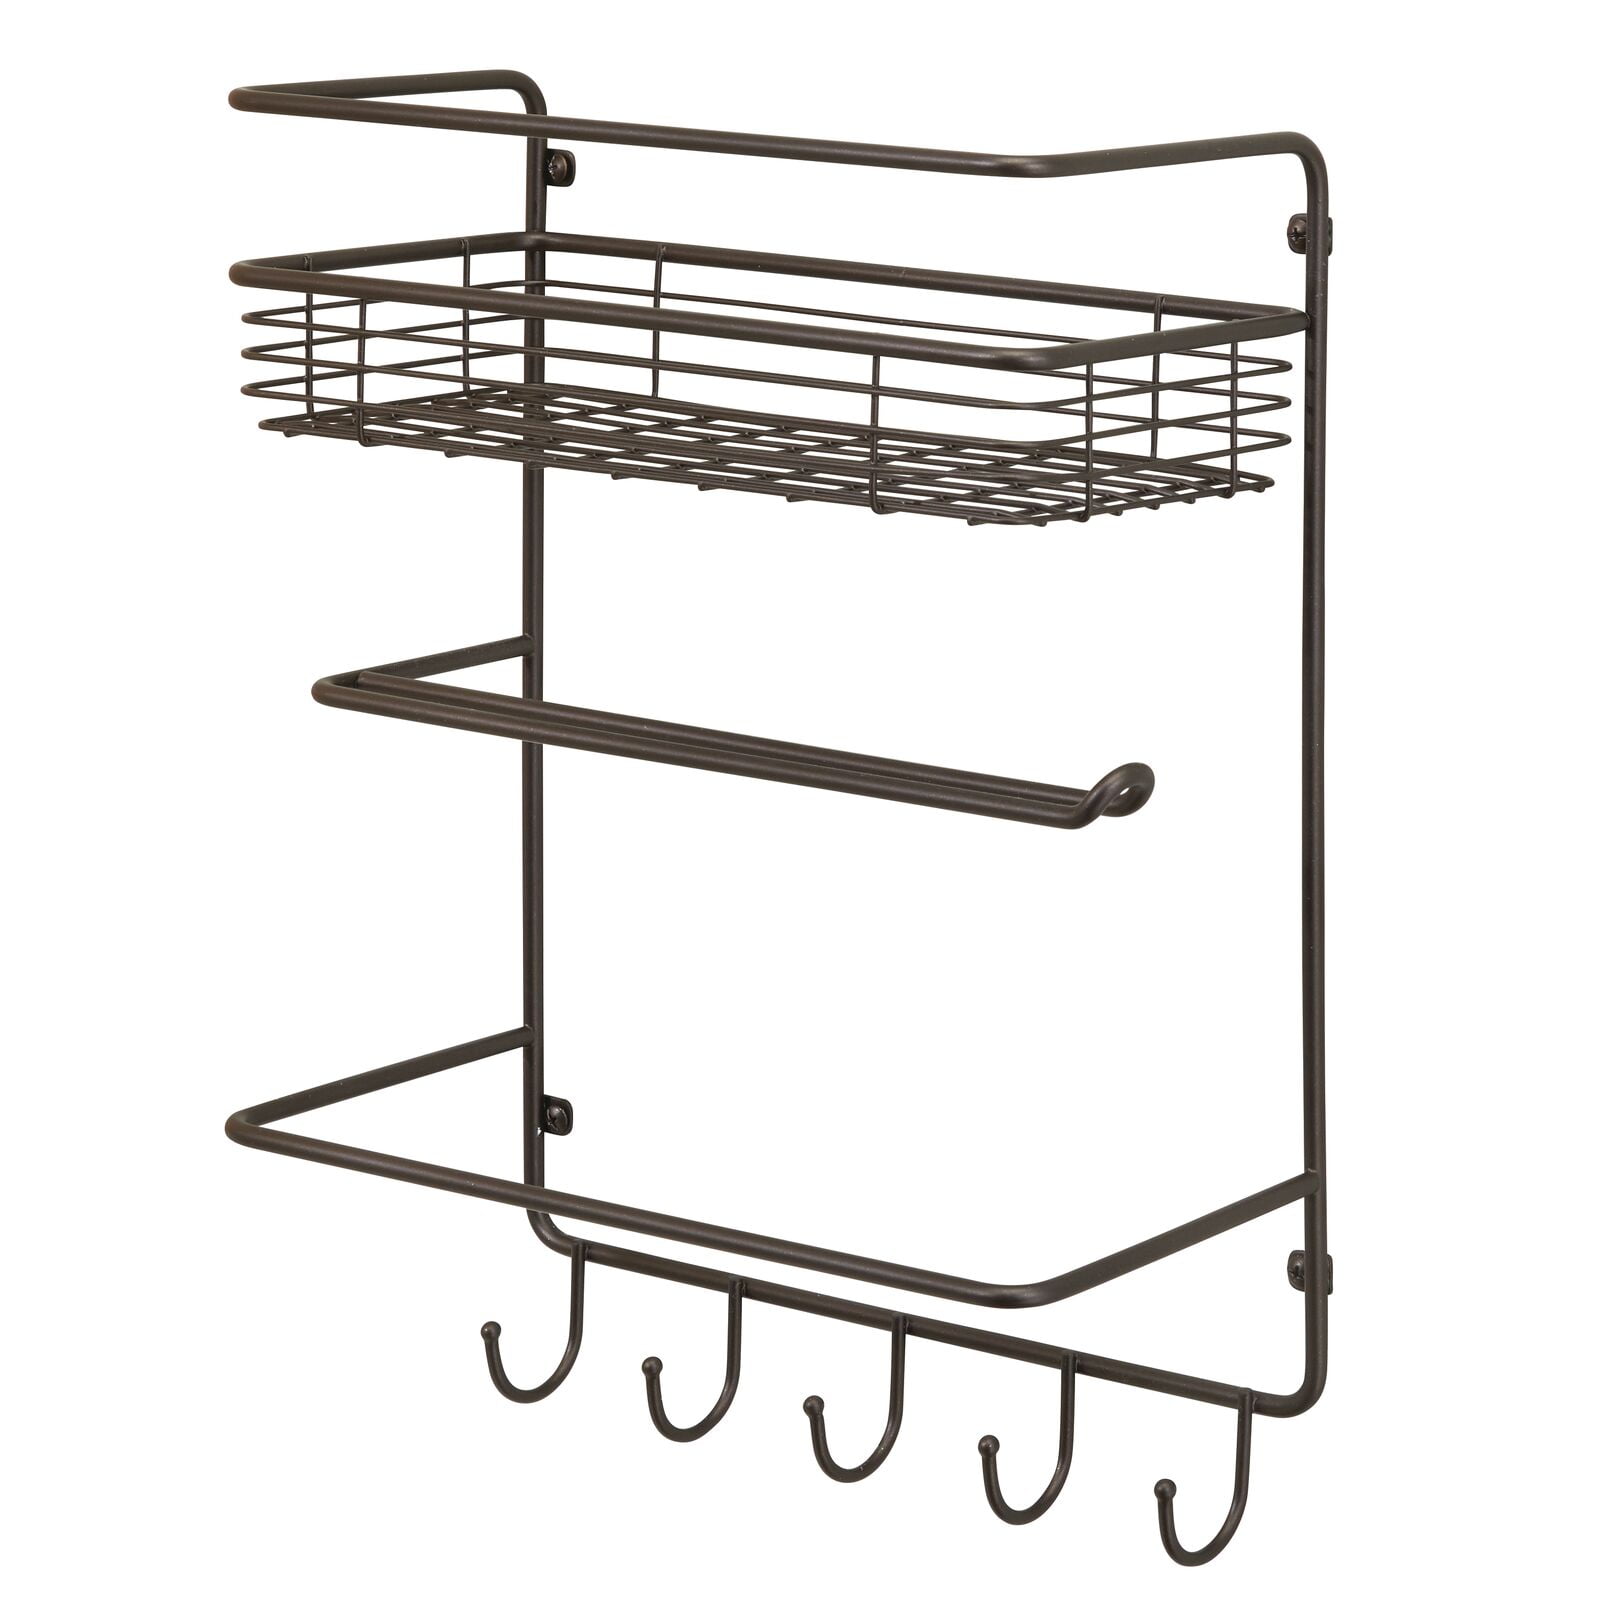 mDesign Farmhouse Paper Towel Holder and Multi-Purpose Shelf Matte Black Kitchen Garage Utility Room Pantry Wall Mount Storage Organizer for Laundry Durable Metal Wire Design 